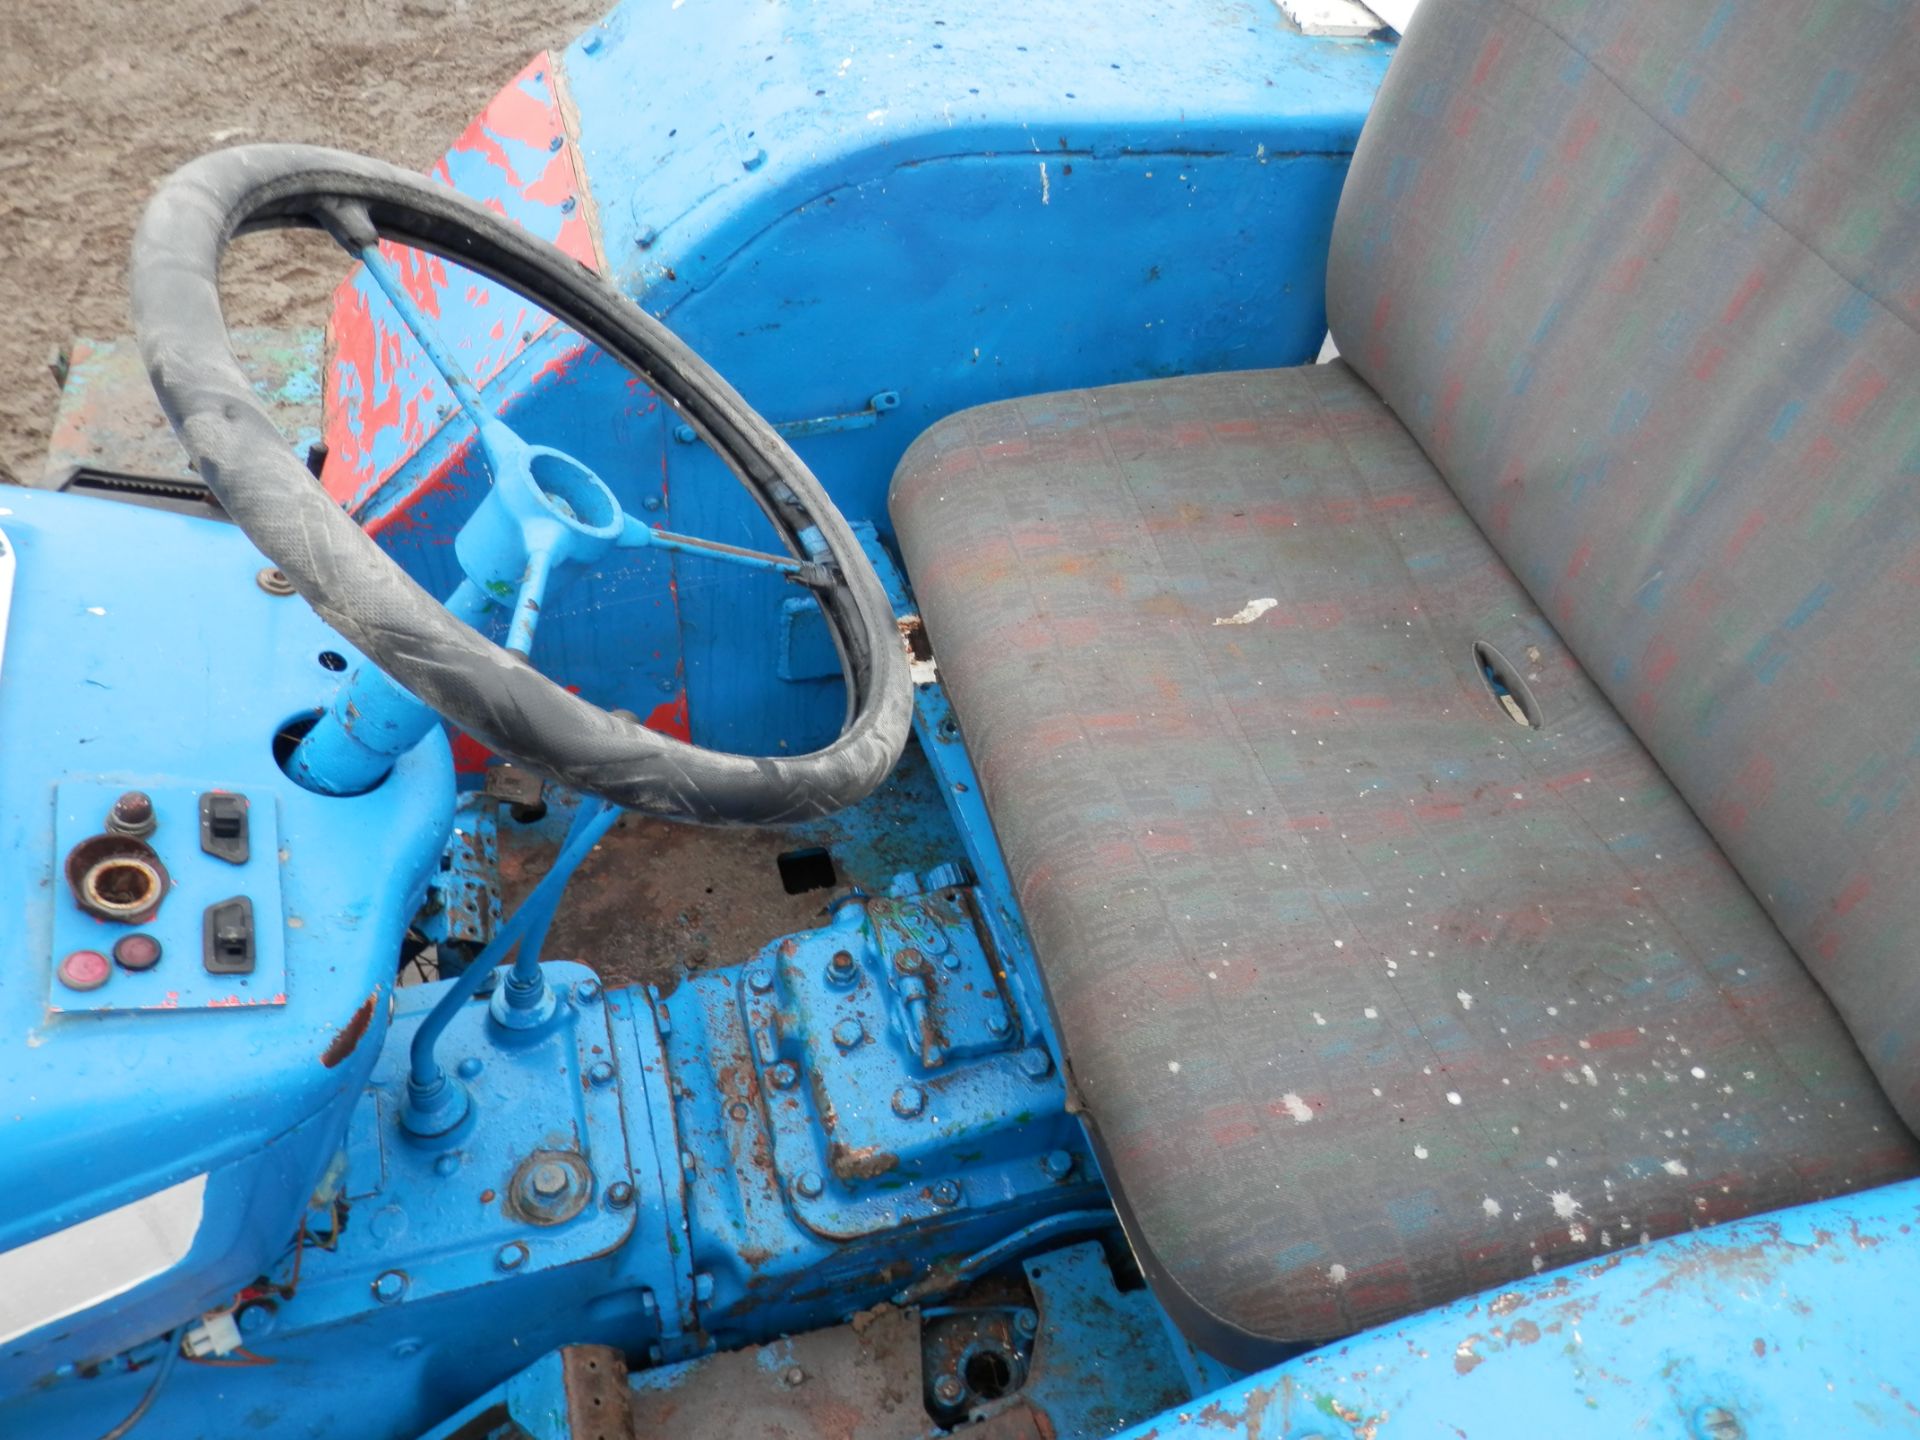 DS - 1960S FORD COUNTY 1004 4 WHEEL DRIVE TRACTOR, RUNS & DRIVES.   UNSURE OF EXACT YEAR BUT THESE - Image 4 of 10